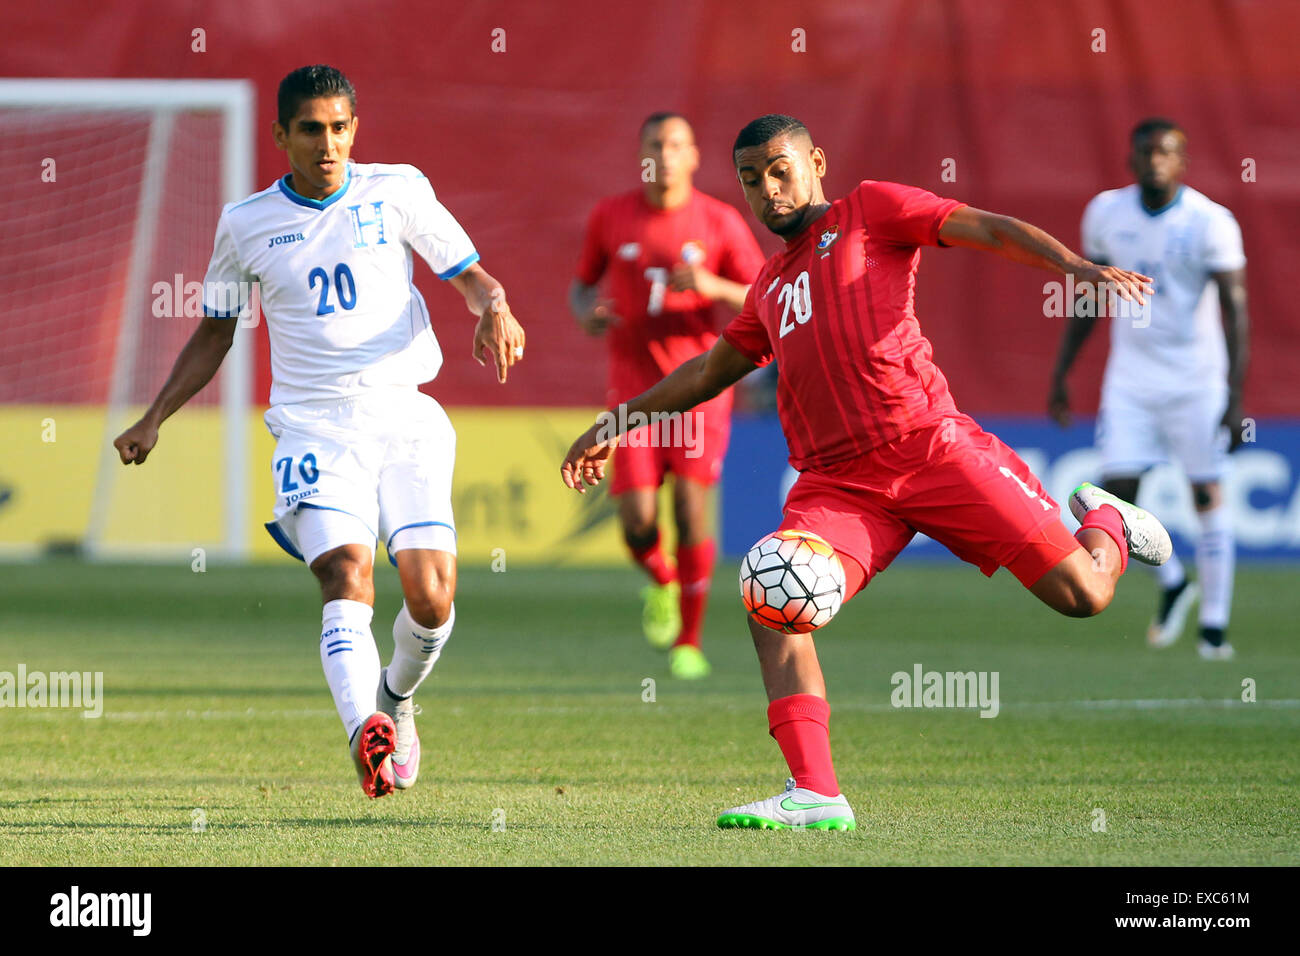 July 10, 2015; Foxborough, MA, USA; Panama midfielder Anibal Godoy (20) and Honduras midfielder Jorge Claros (20) in action during the first half of the CONCACAF Gold Cup match between Panama and Honduras at Gillette Stadium. The match ended in a 1-1 tie. Anthony Nesmith/Cal Sport Media Stock Photo